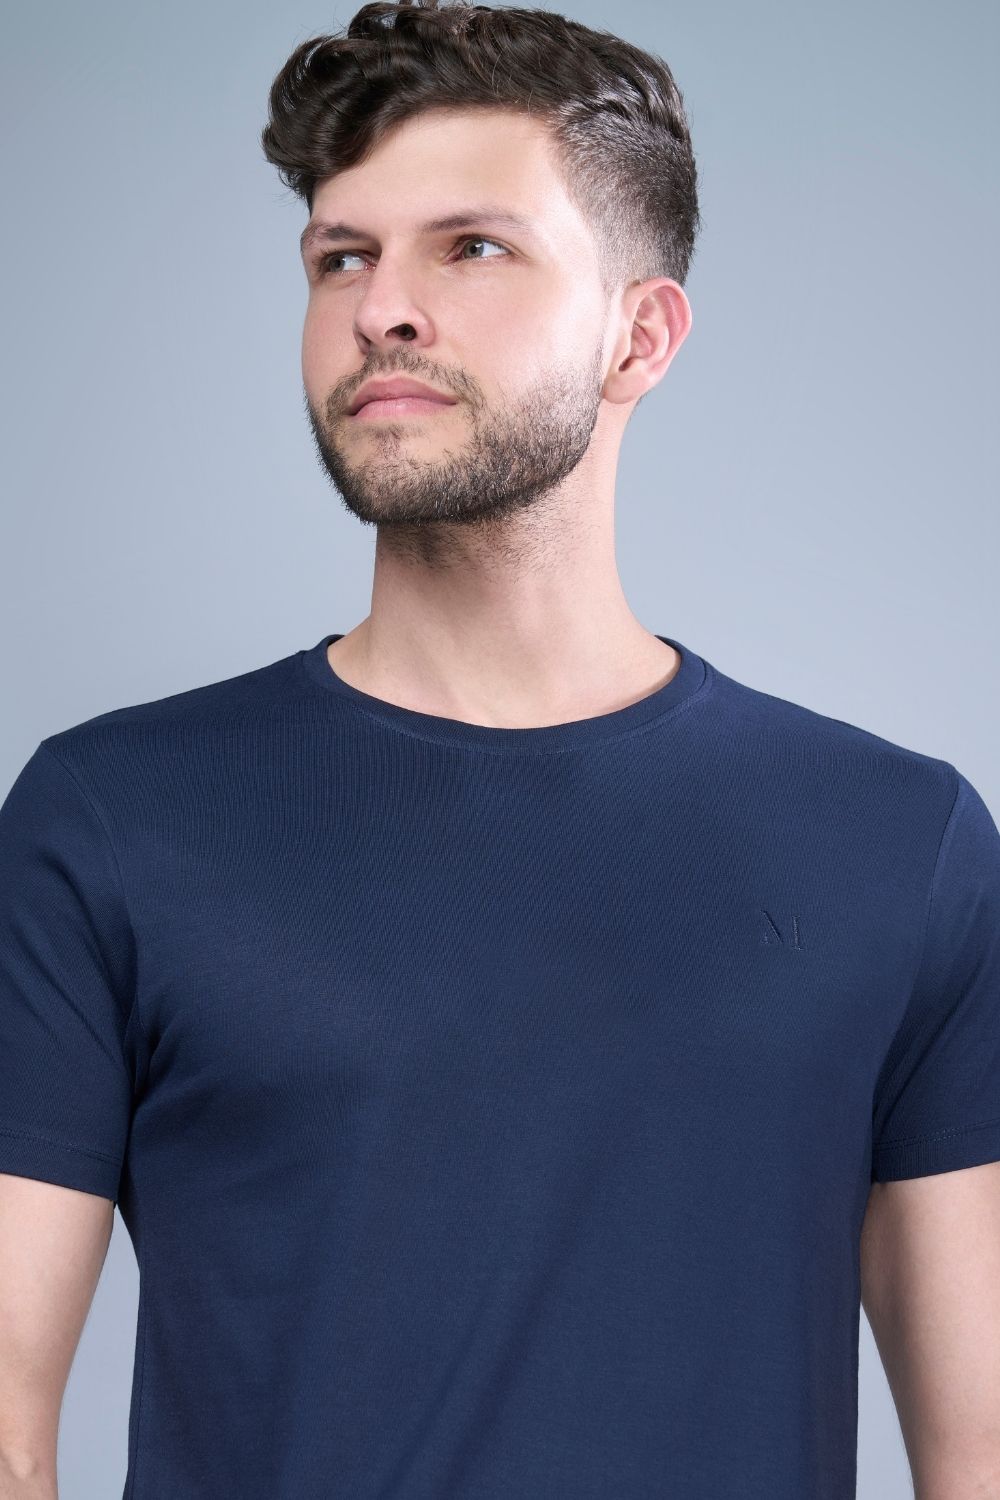 Teal Navy colored, solid t shirt for men with round neck and half sleeves, close up.